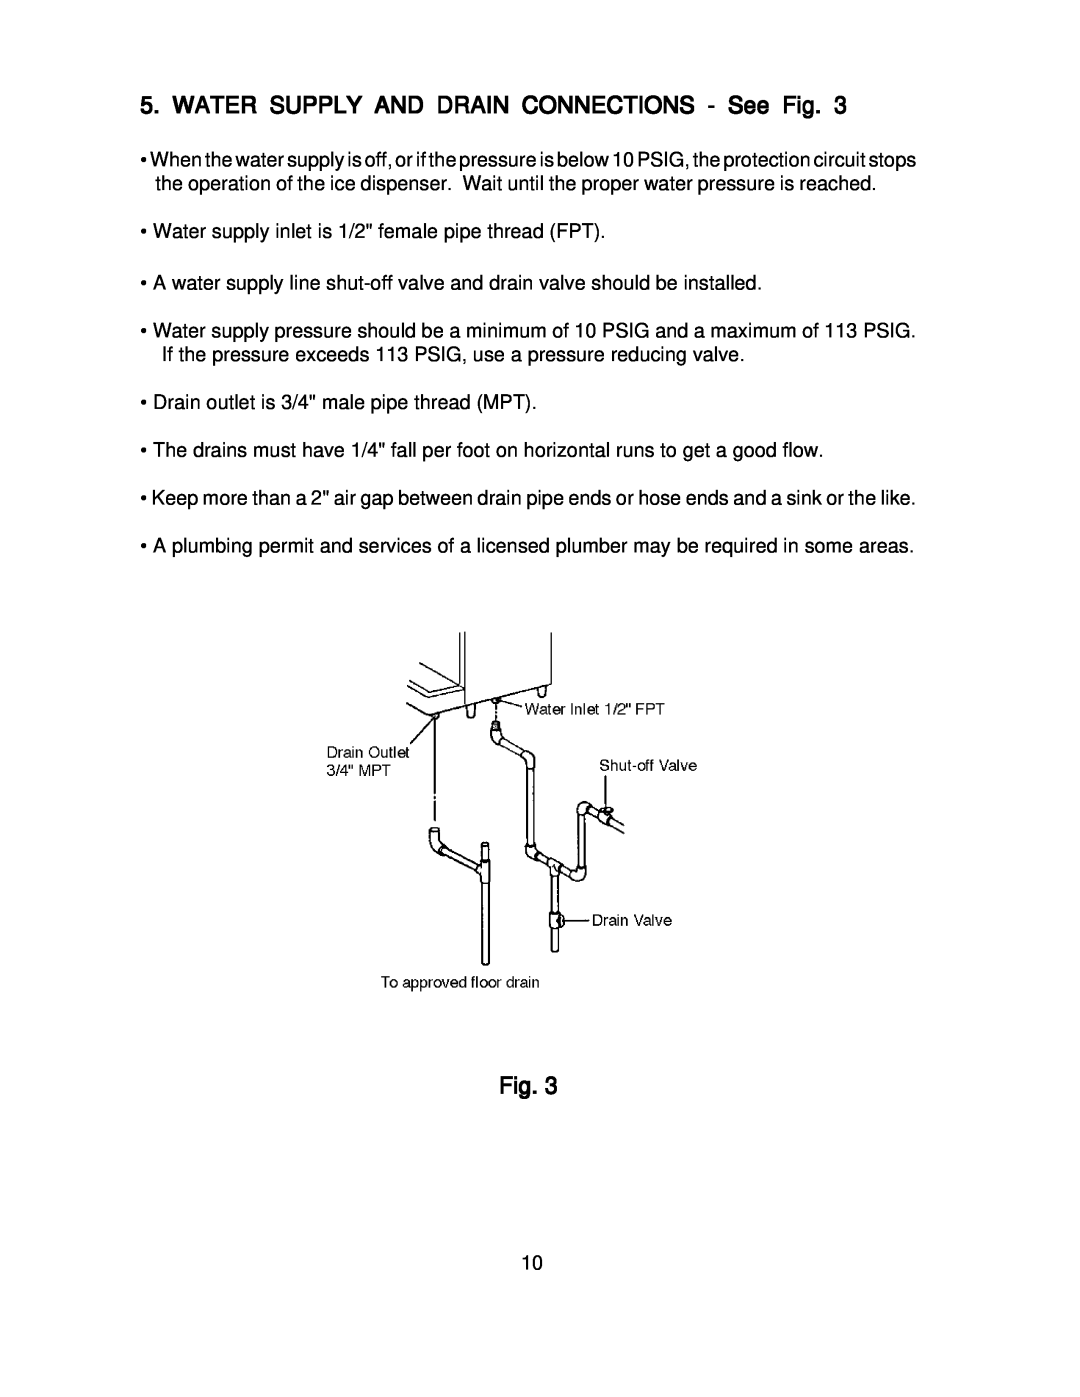 Hoshizaki DCM-270BAH-OS instruction manual WATER SUPPLY AND DRAIN CONNECTIONS - See Fig 